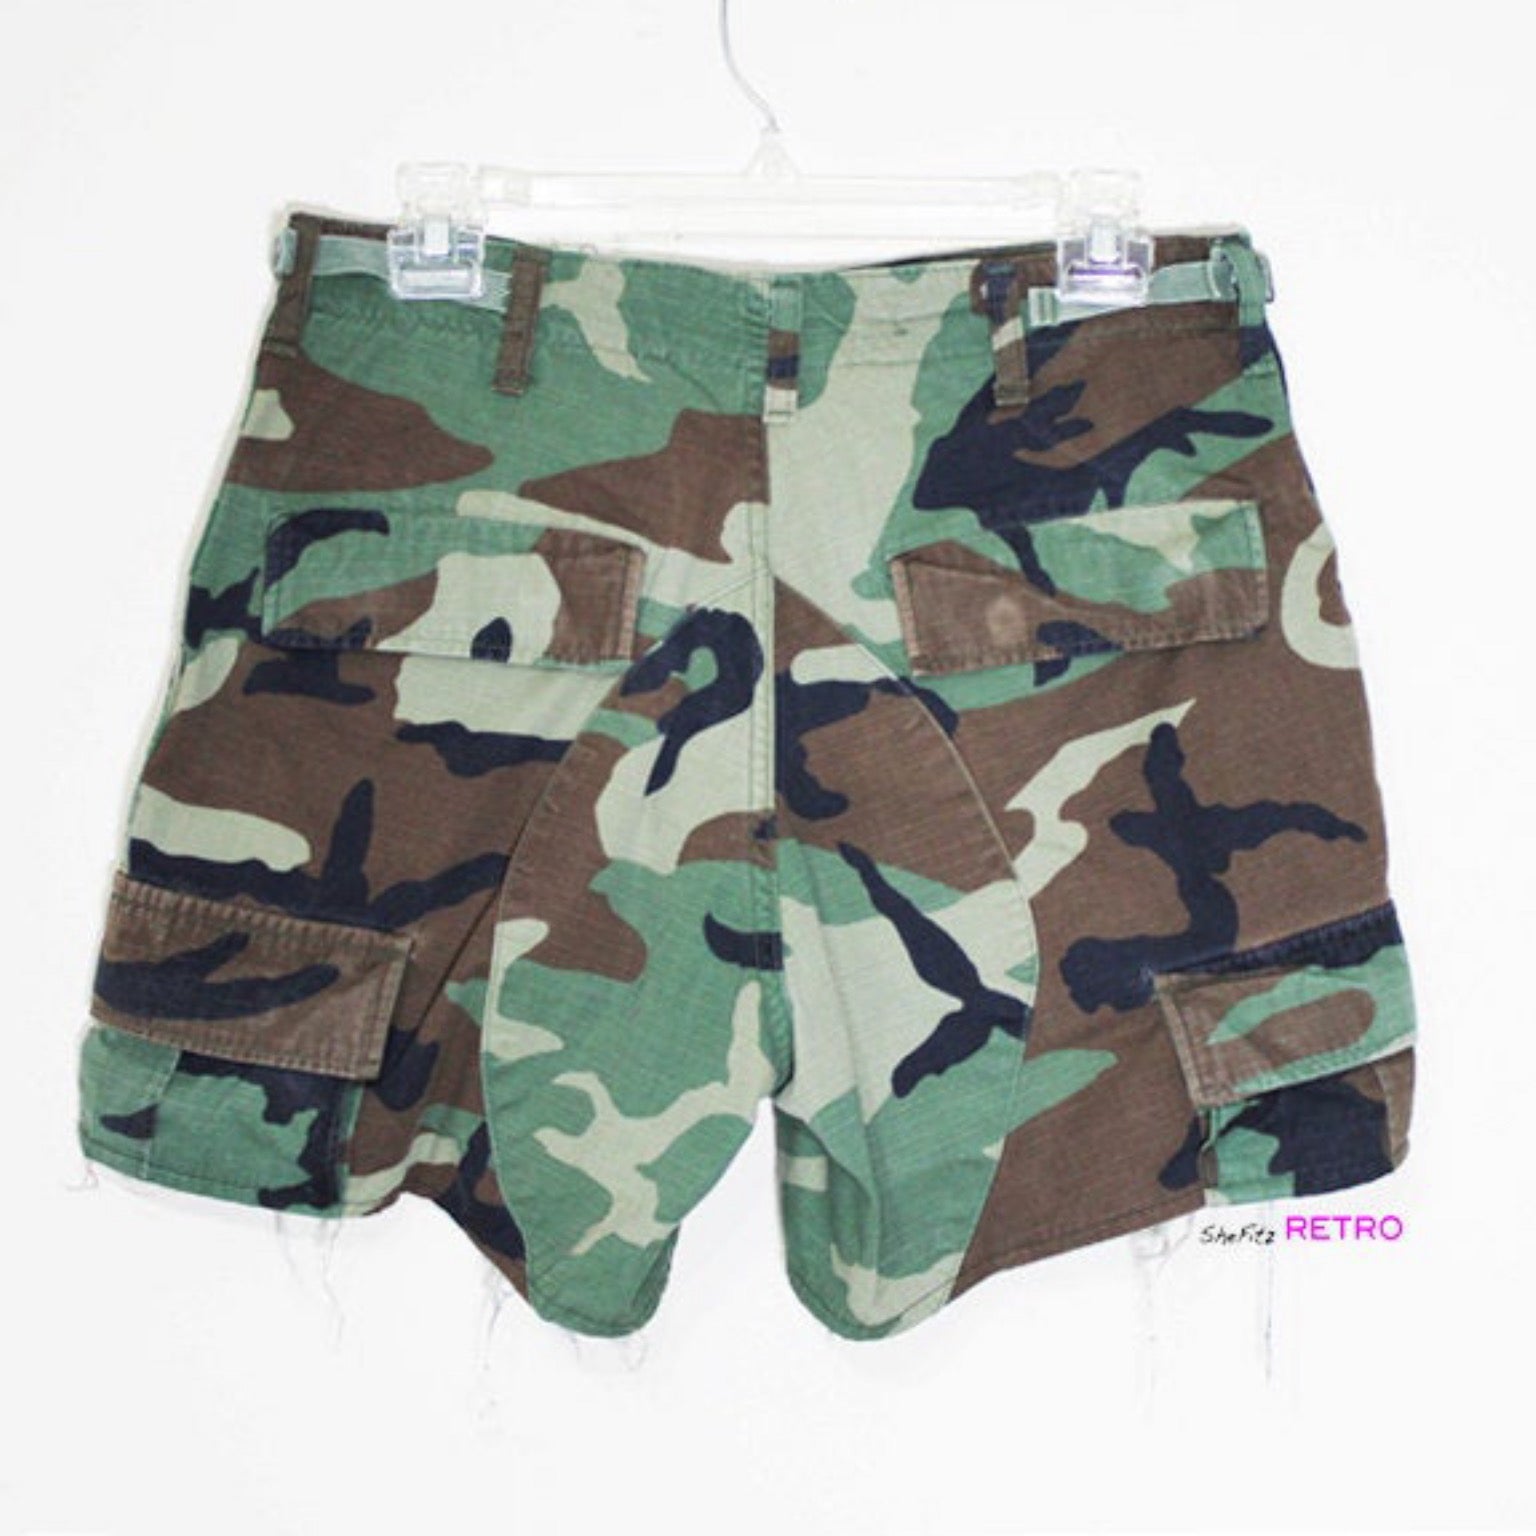 Reworked Vintage High Waisted Camo Cut Off Shorts